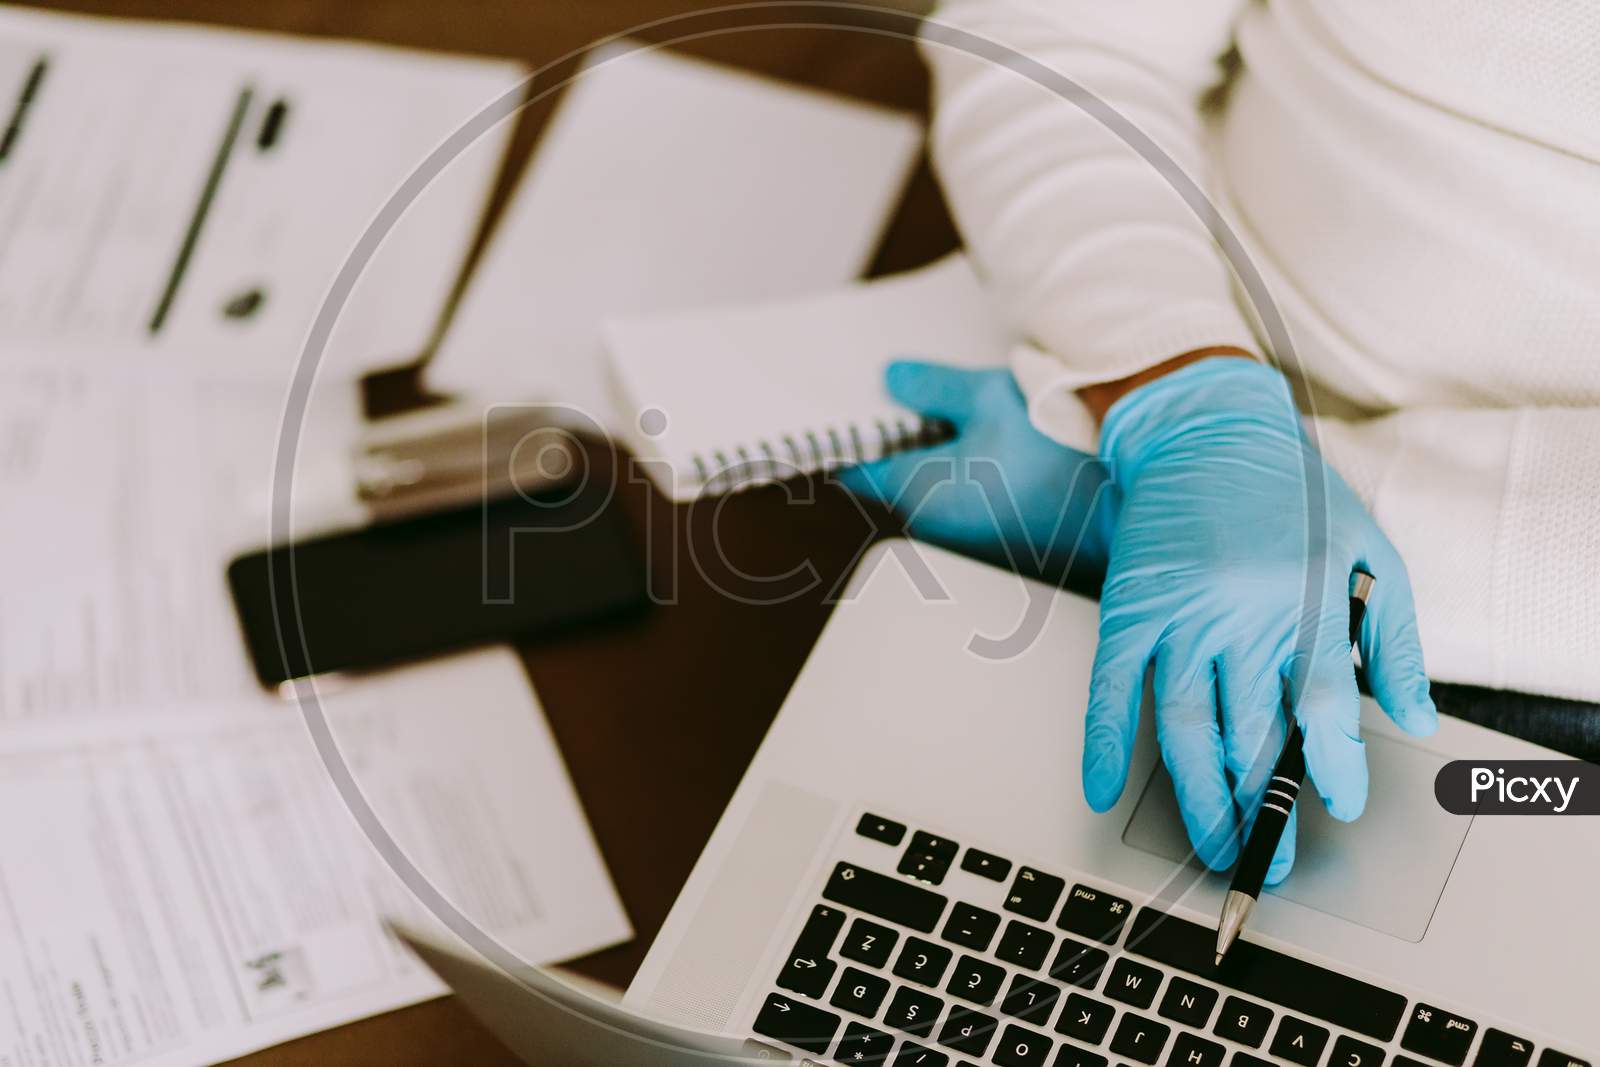 Man Working On Laptop And Wearing Latex Gloves For Virus Prevention